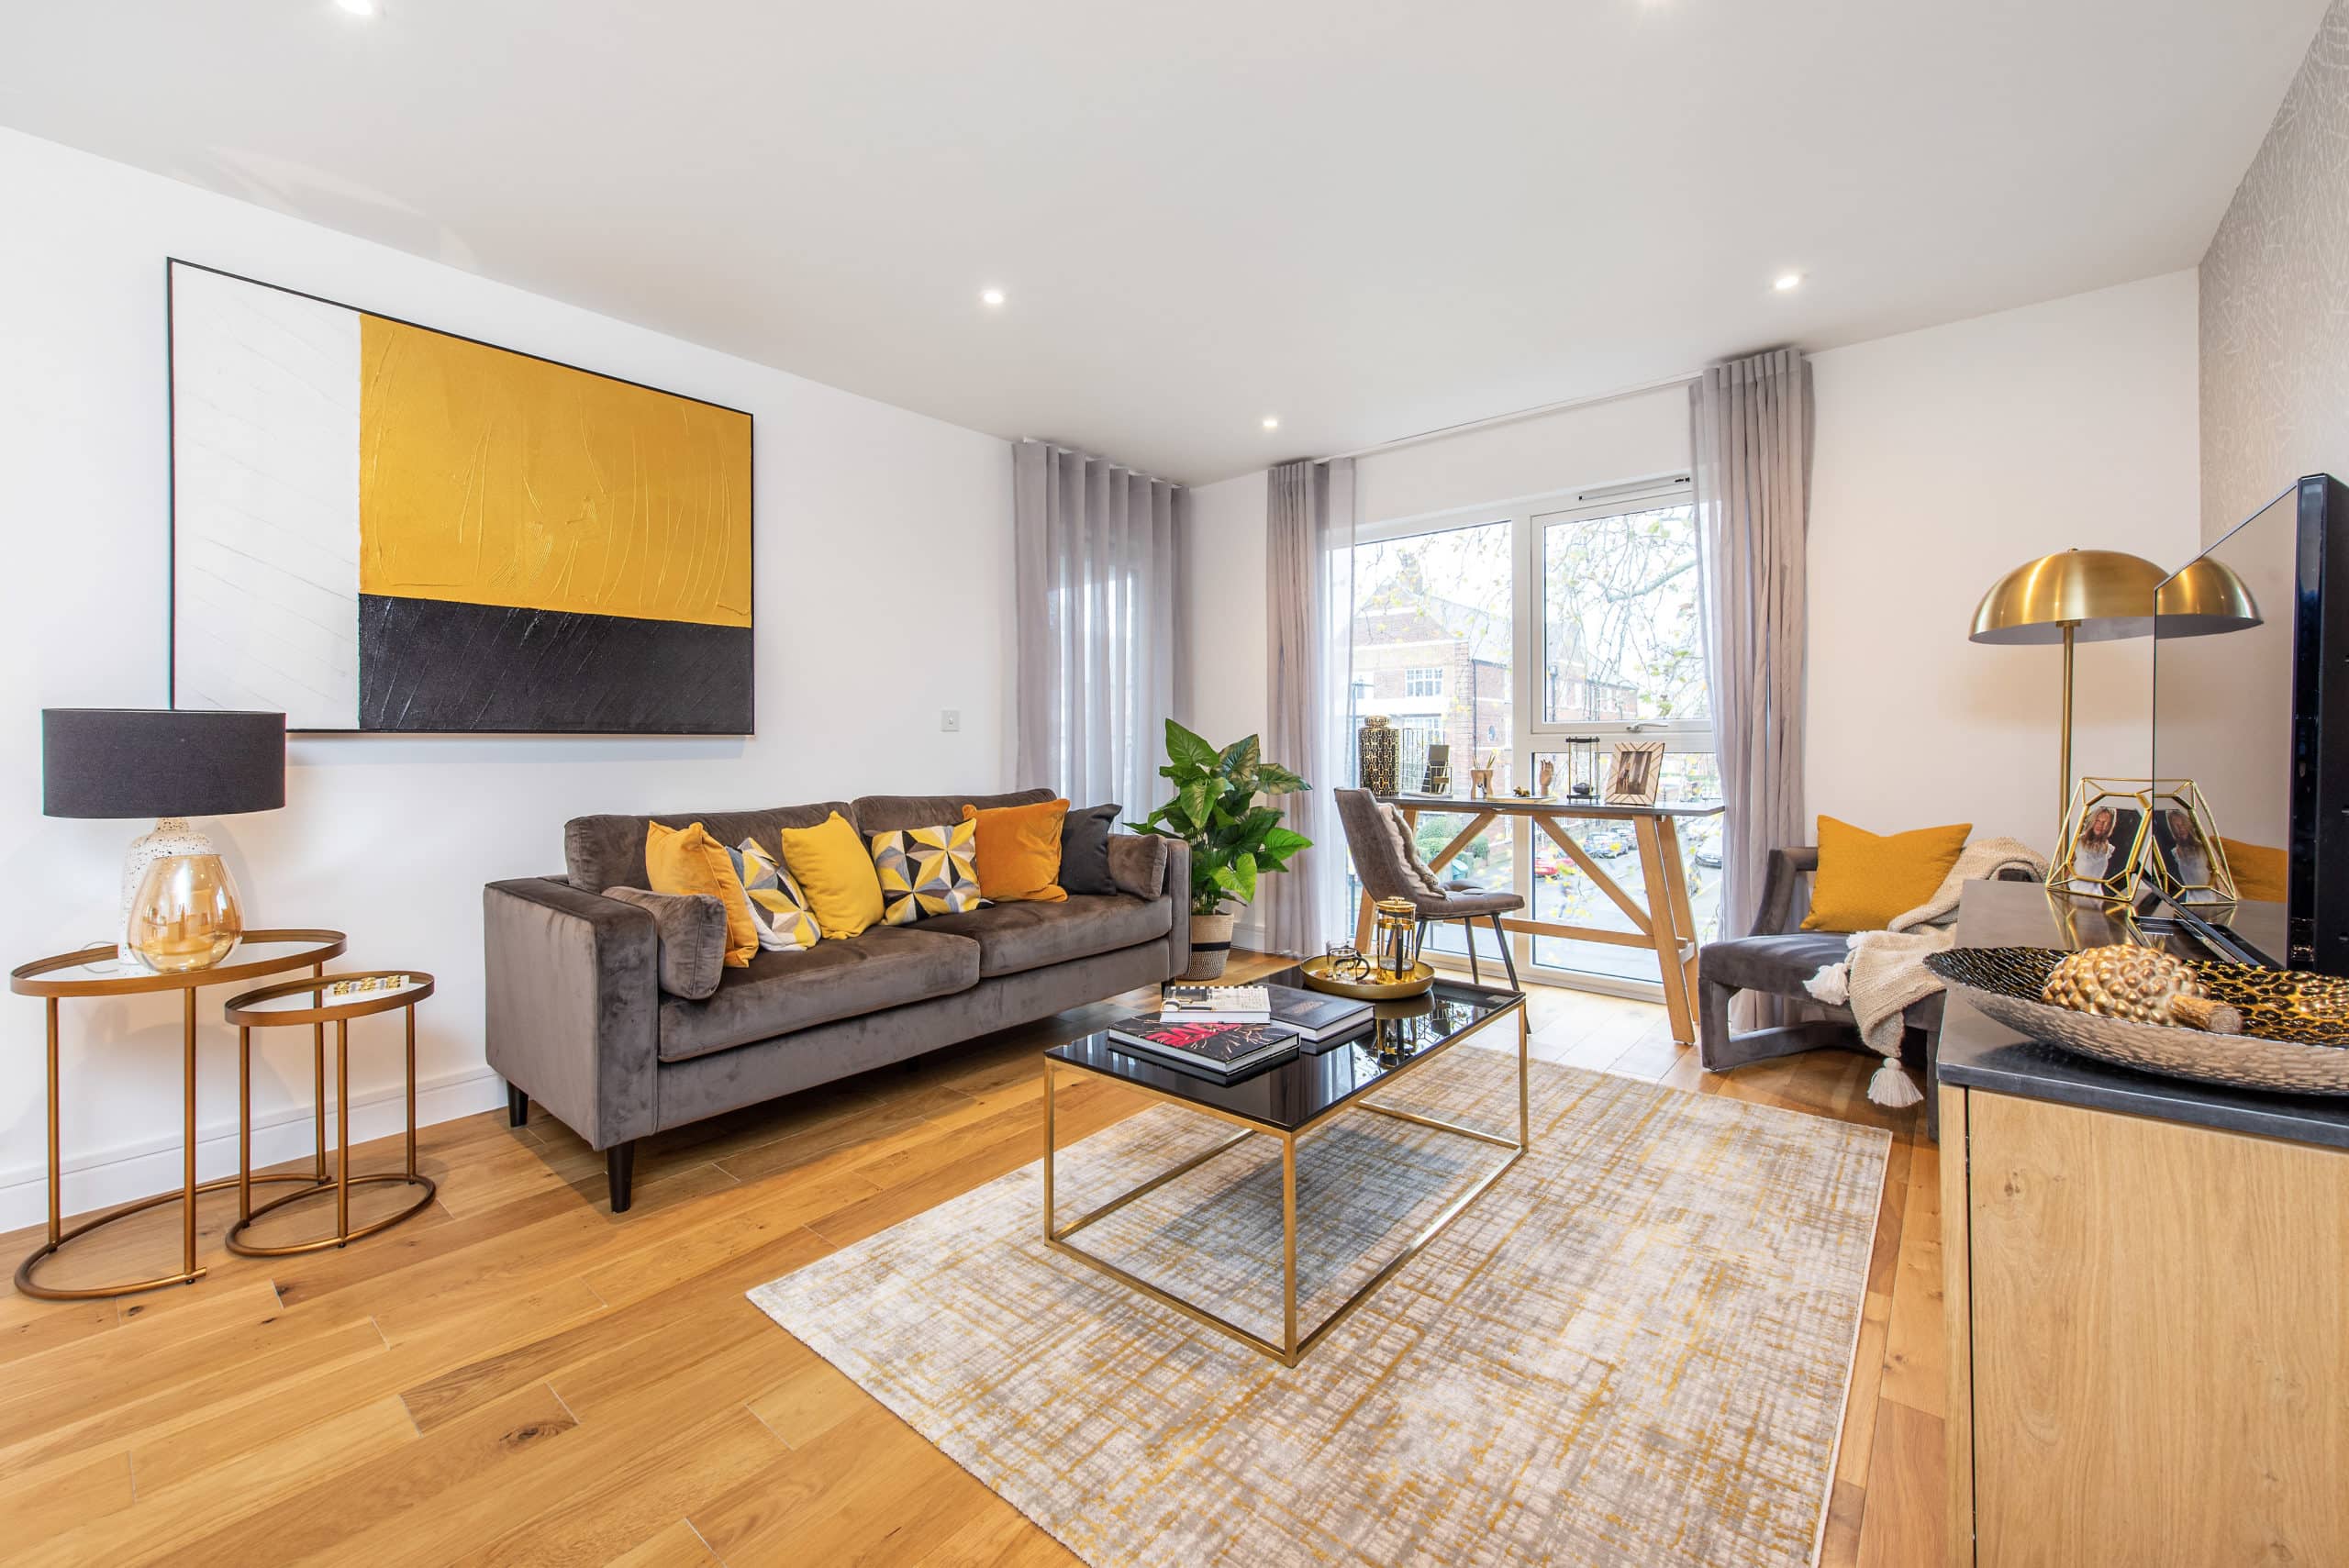 Internal show home photography of SO Resi’s Clapham Park - Shared Ownership homes available on Share to Buy